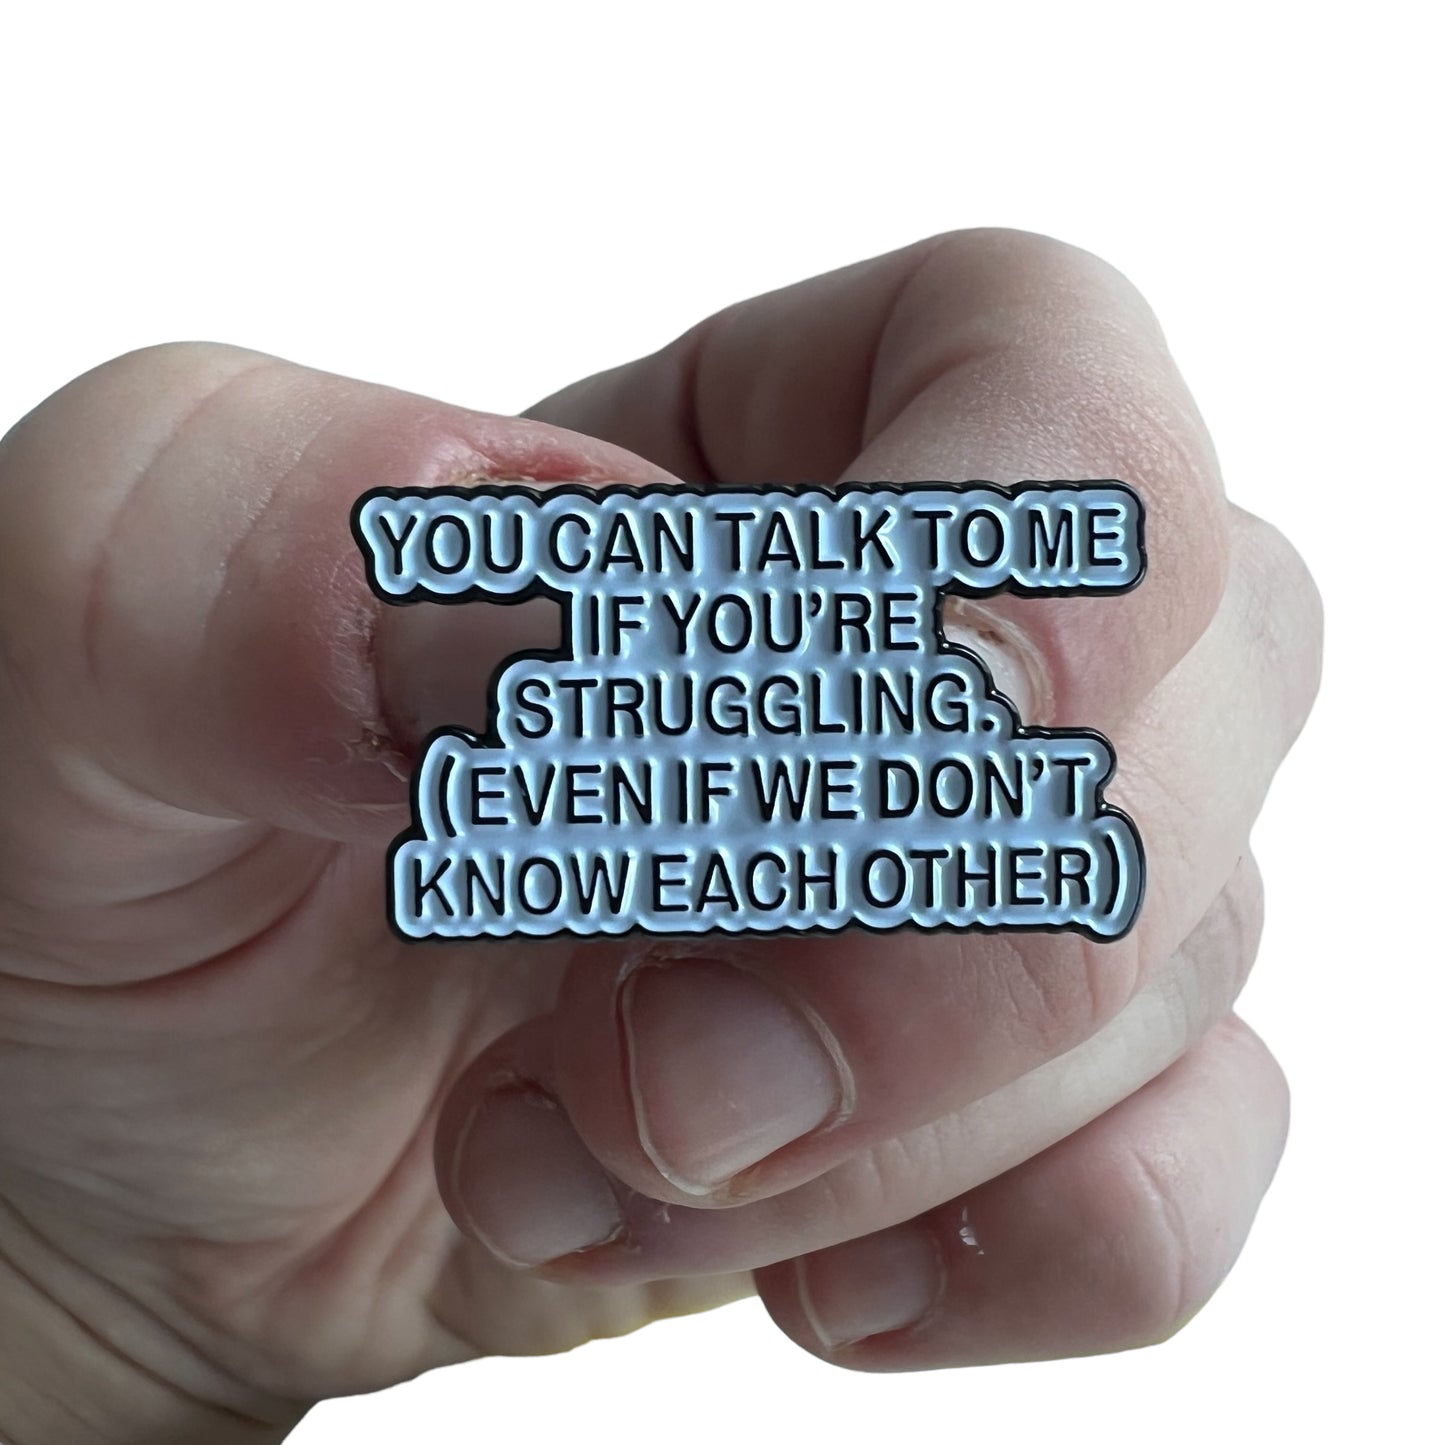 Pin — "You can talk to me if you’re struggling (even if we don’t know each other).”